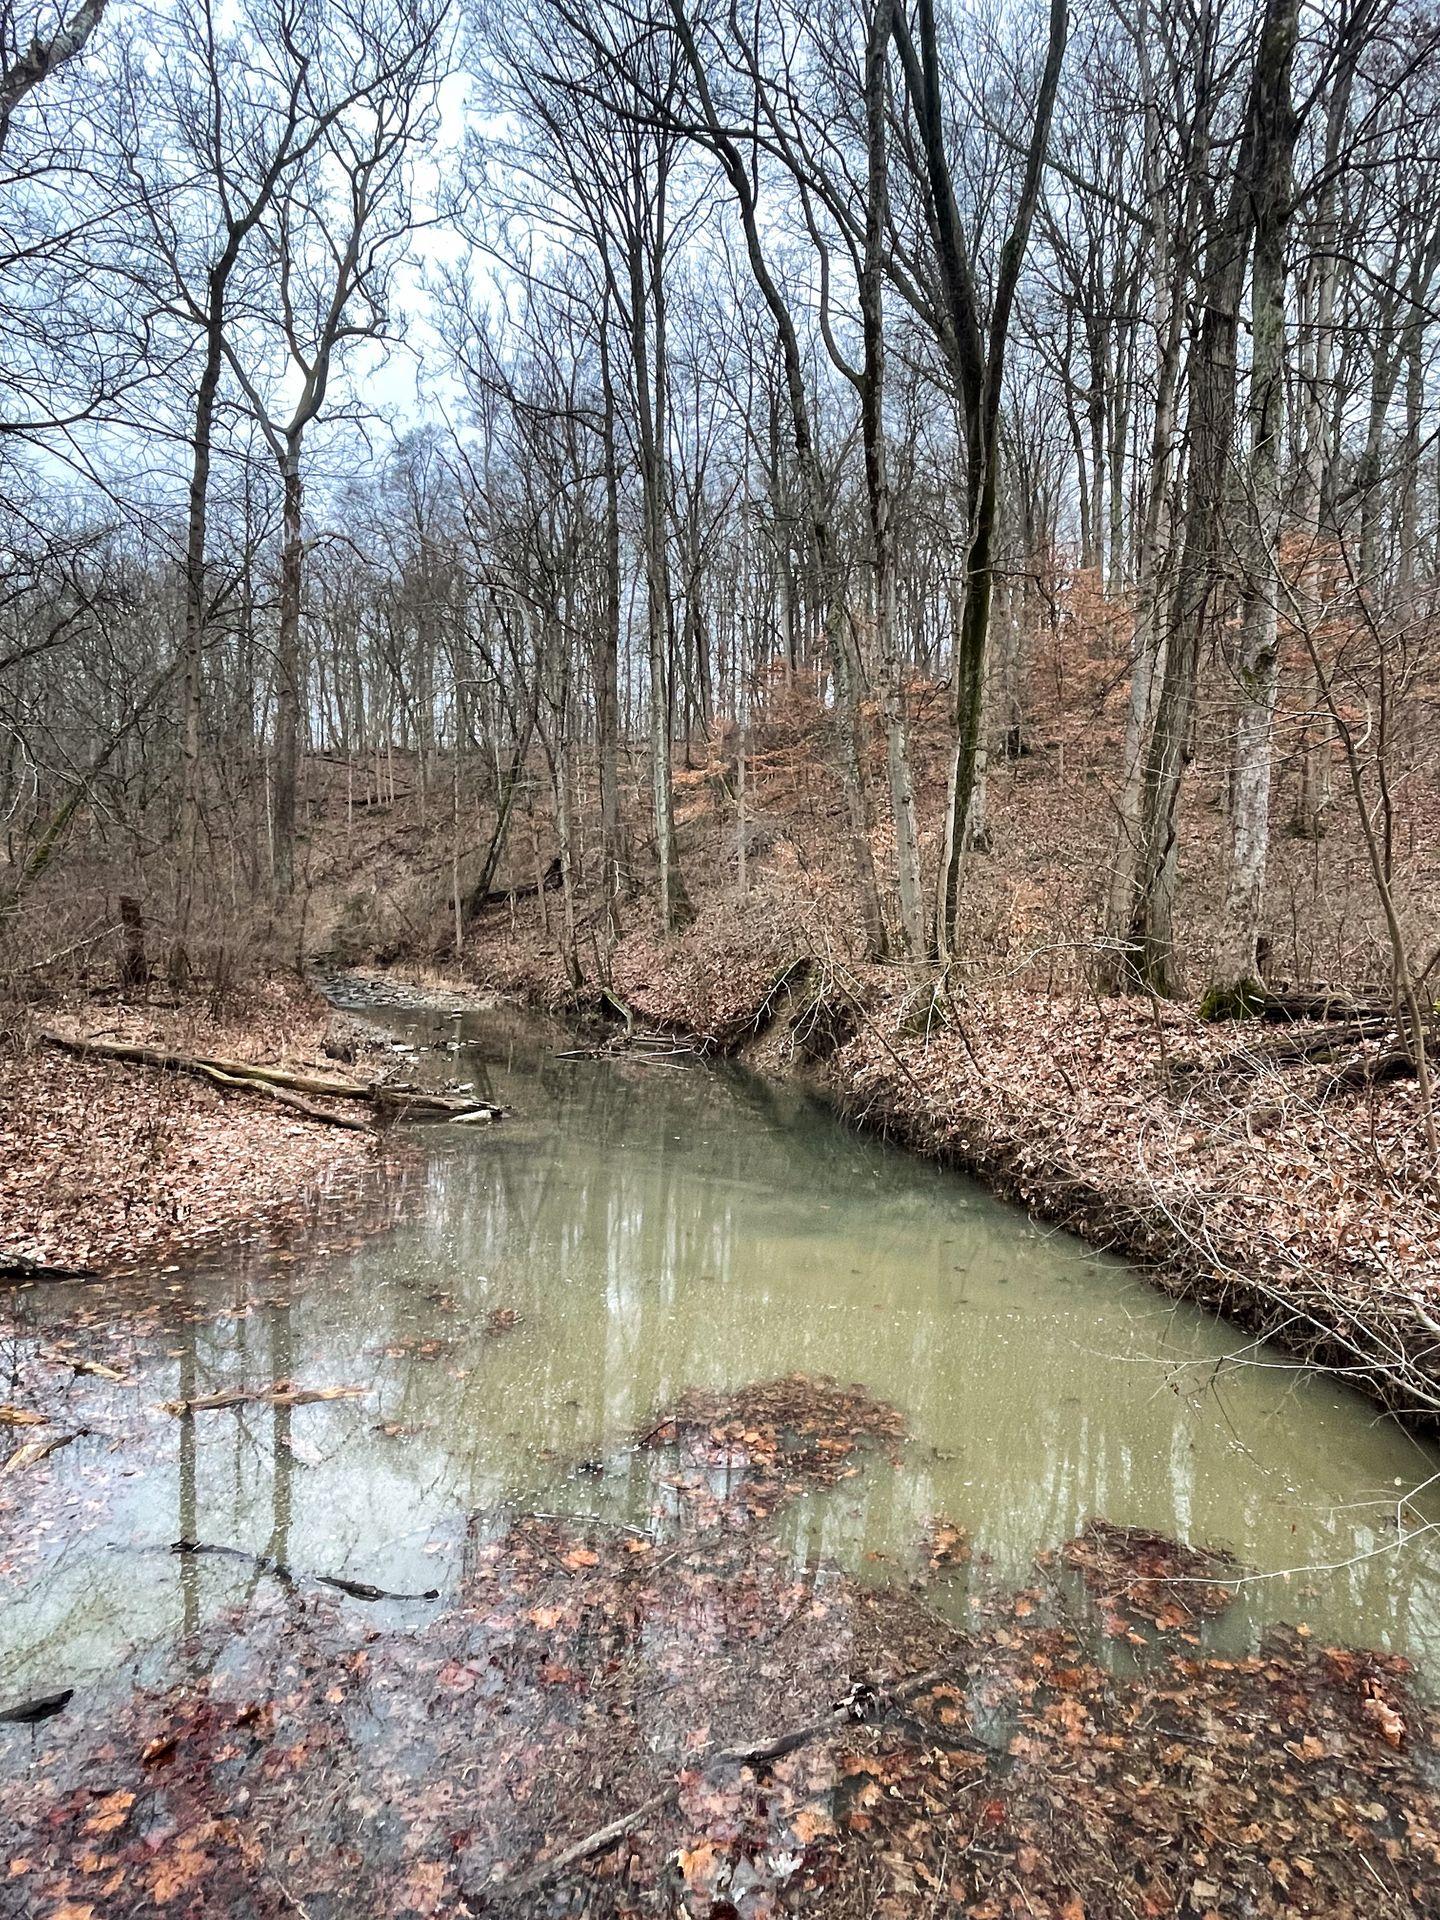 A creek next to a hill covered in fallen leaves